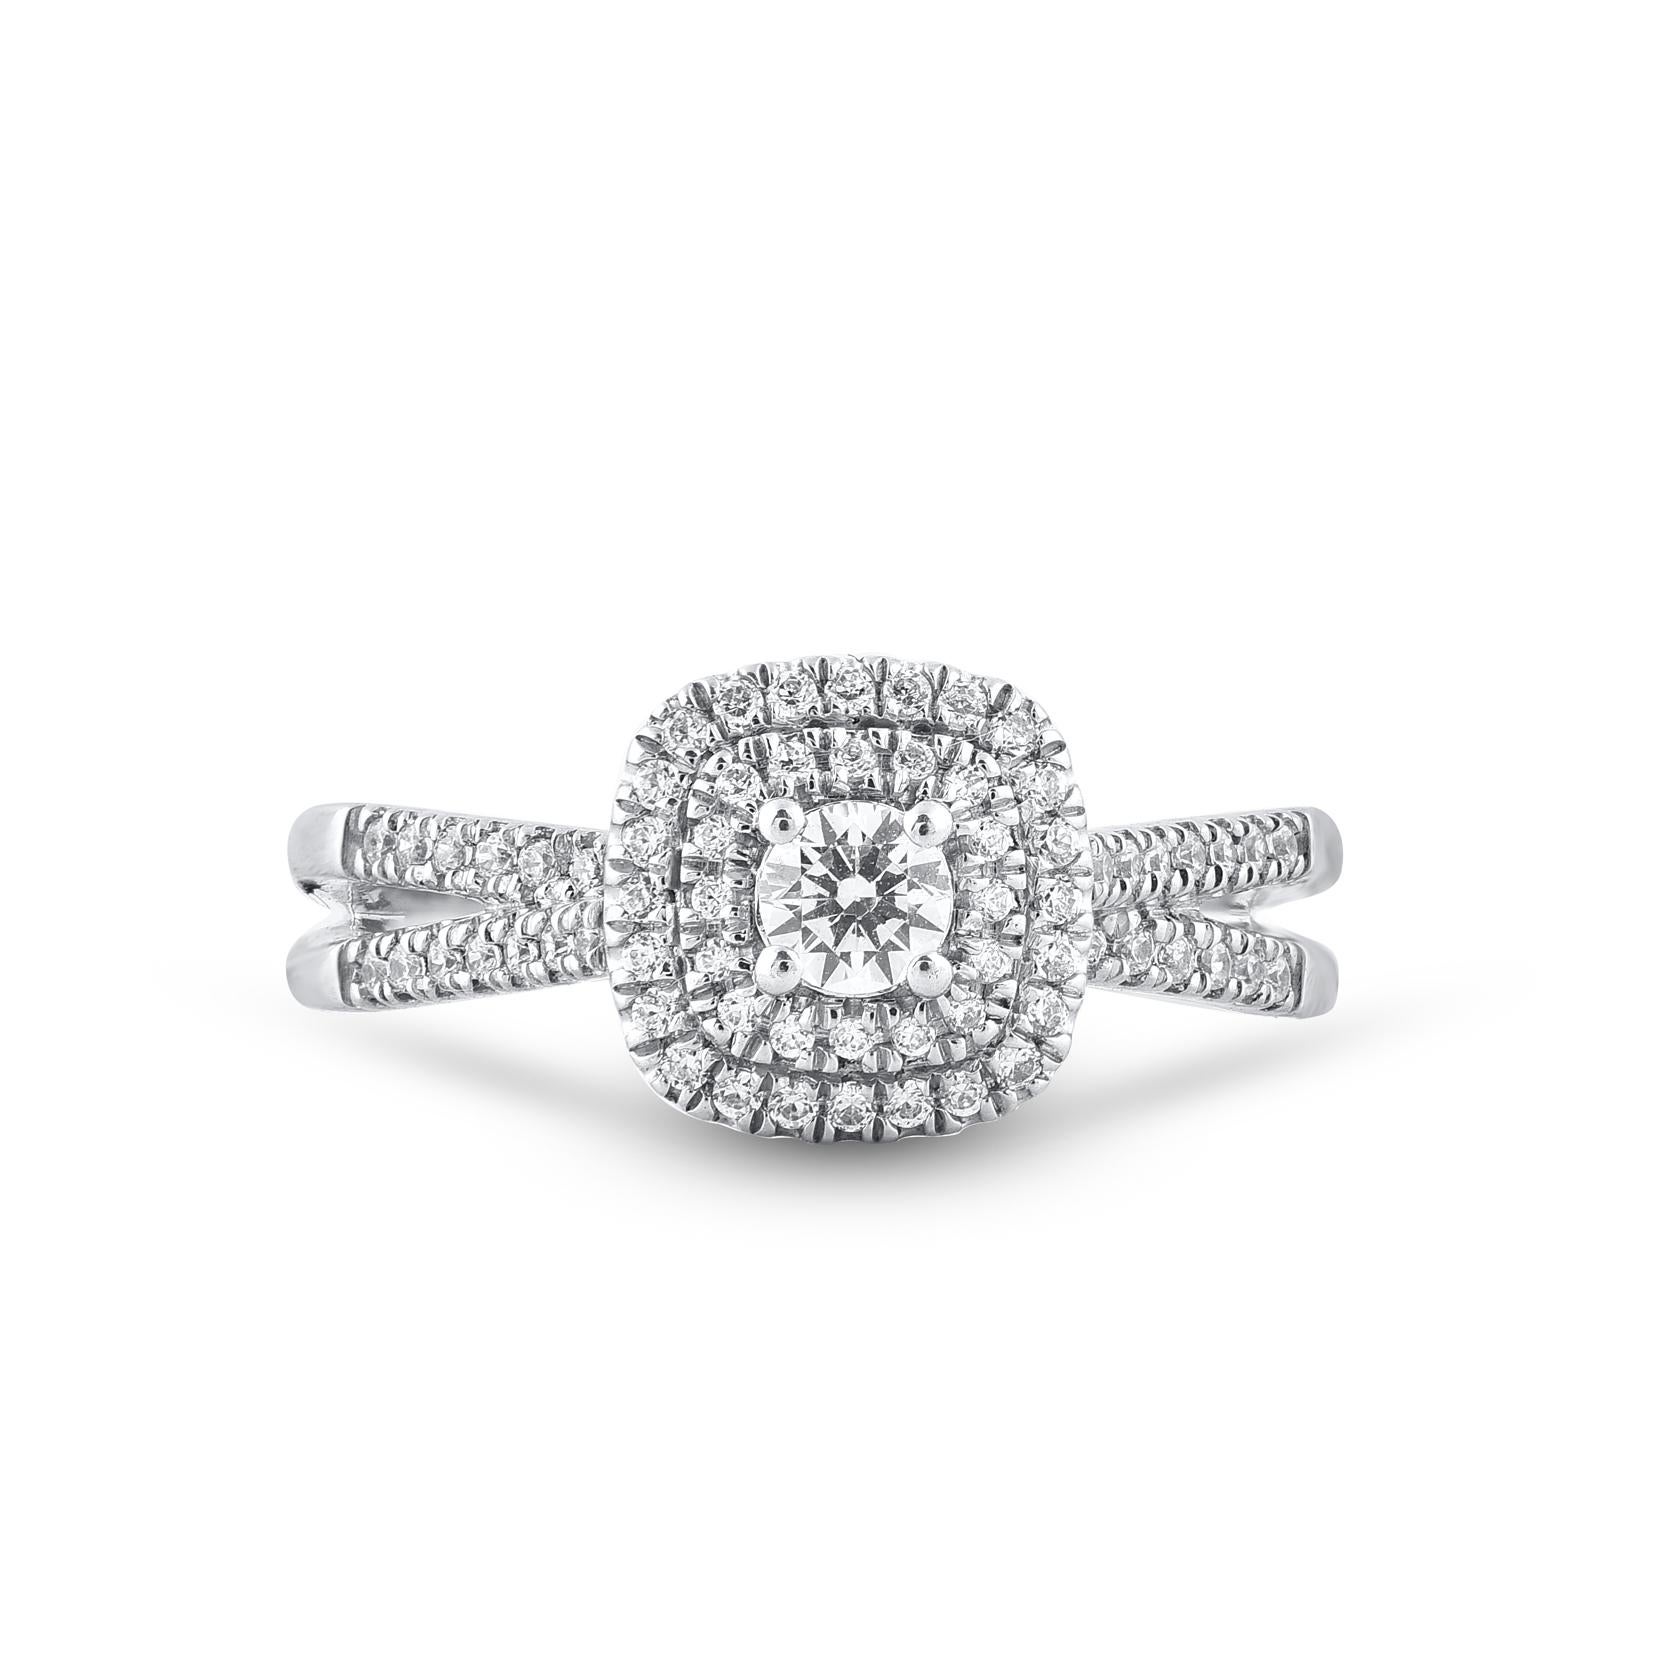 Truly exquisite, this diamond anniversary ring is sure to be admired for the inherent classic beauty and elegance within its design. These ring is crafted in 14KT white gold, and studded with 71 single cut and brilliant cut natural diamonds in prong